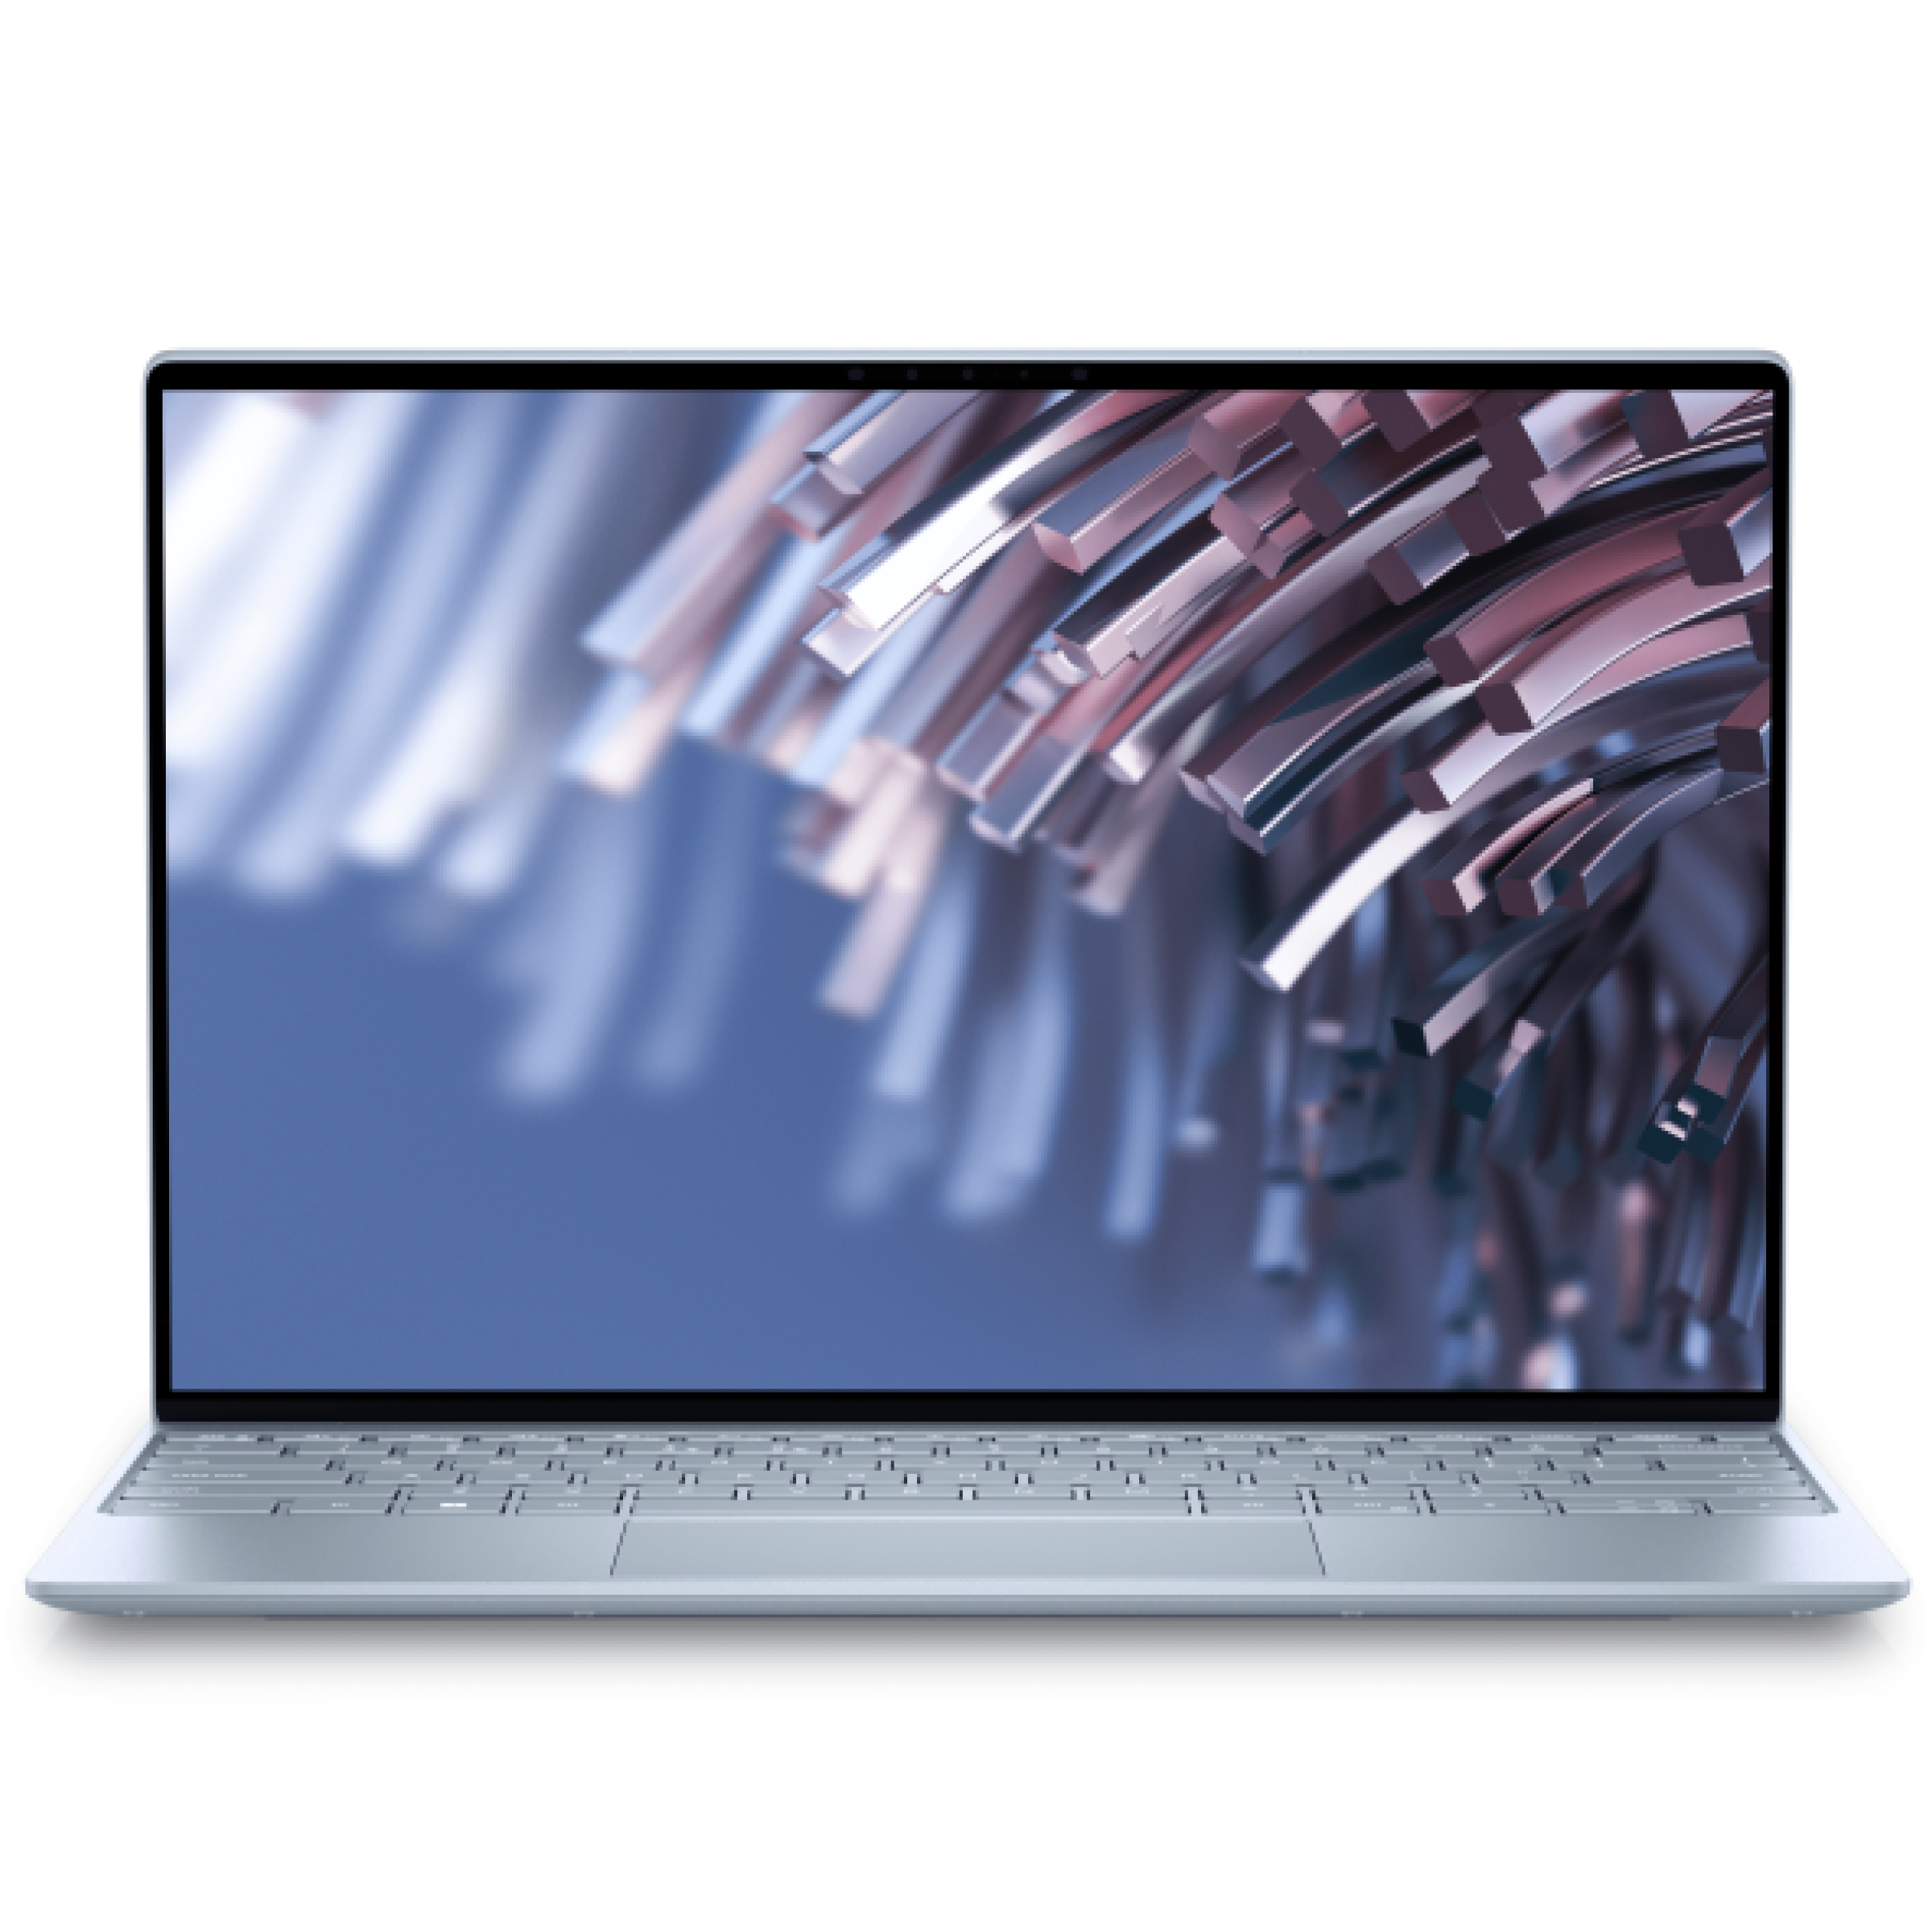 Where can I download this dell xps wallpaper  rDell